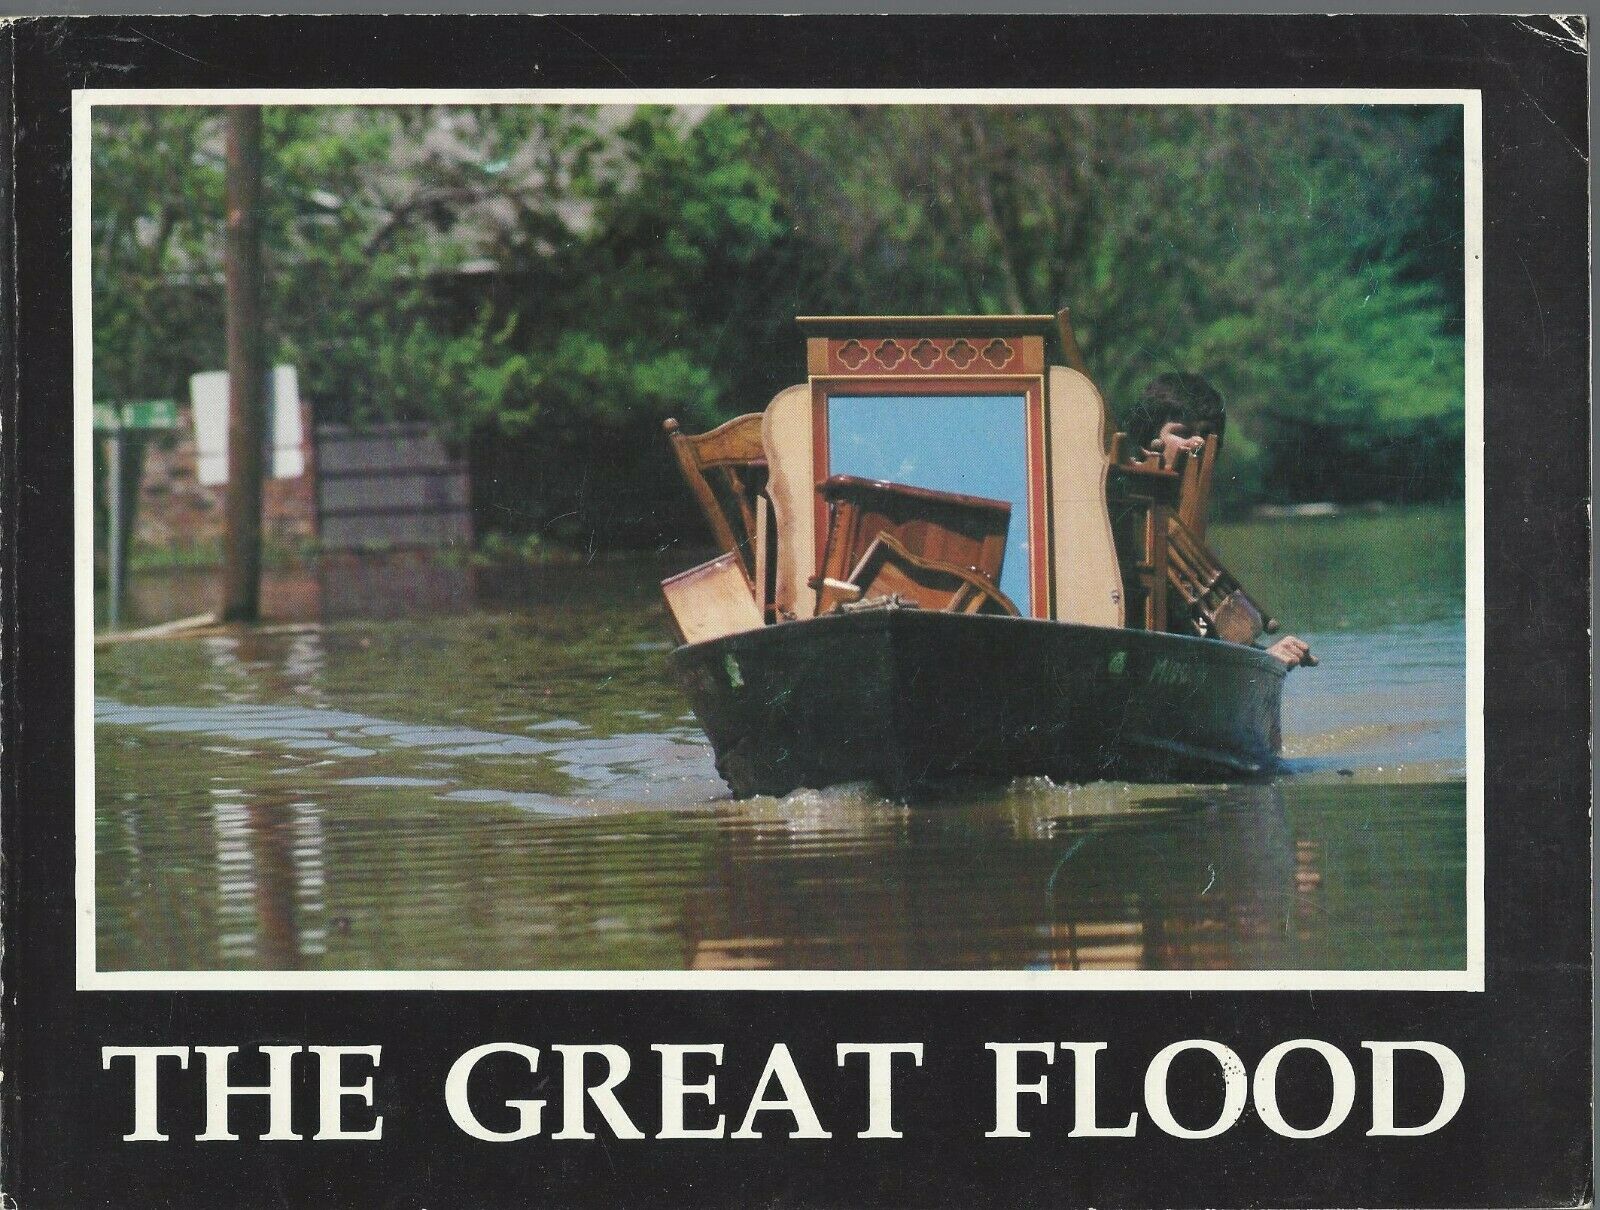 The Great Flood 1979-a Photo-essay Of Jackson, Mississippi Pearl River Flood--pb